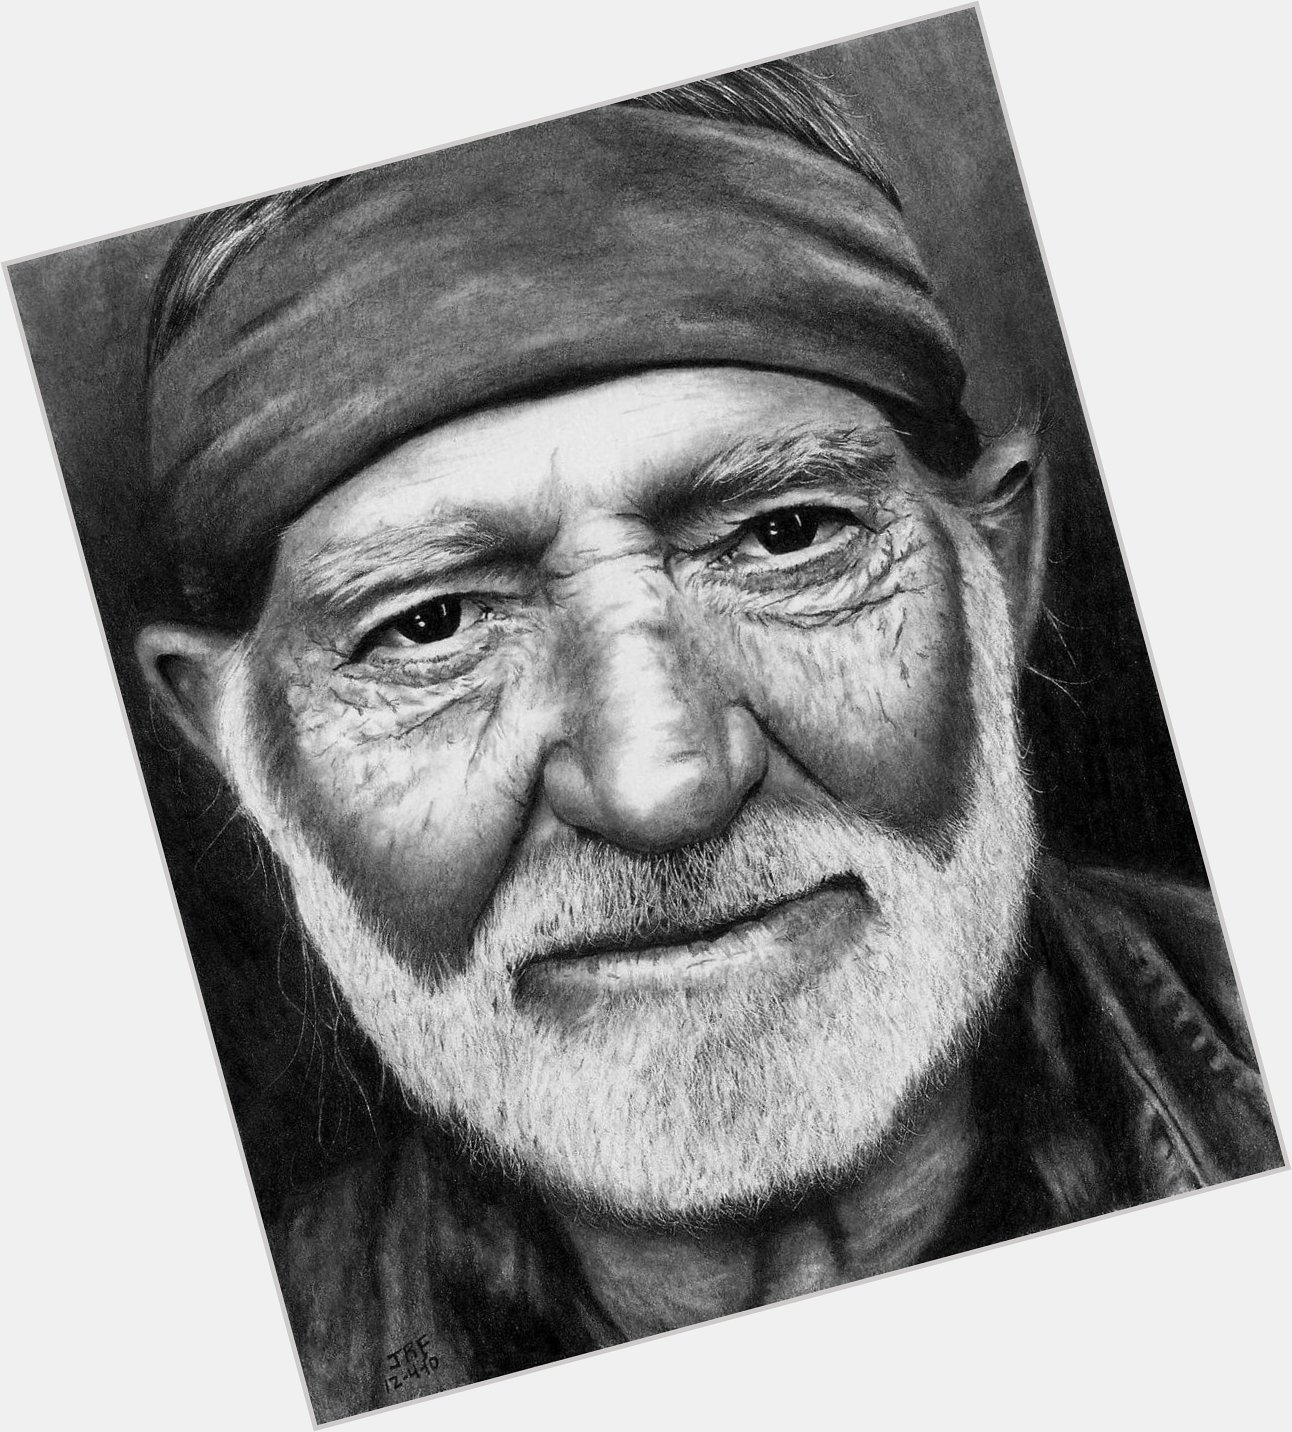 Happy 84th birthday to one of the greatest artist and legend of all time, Willie Nelson!! Texas forever y\all! 